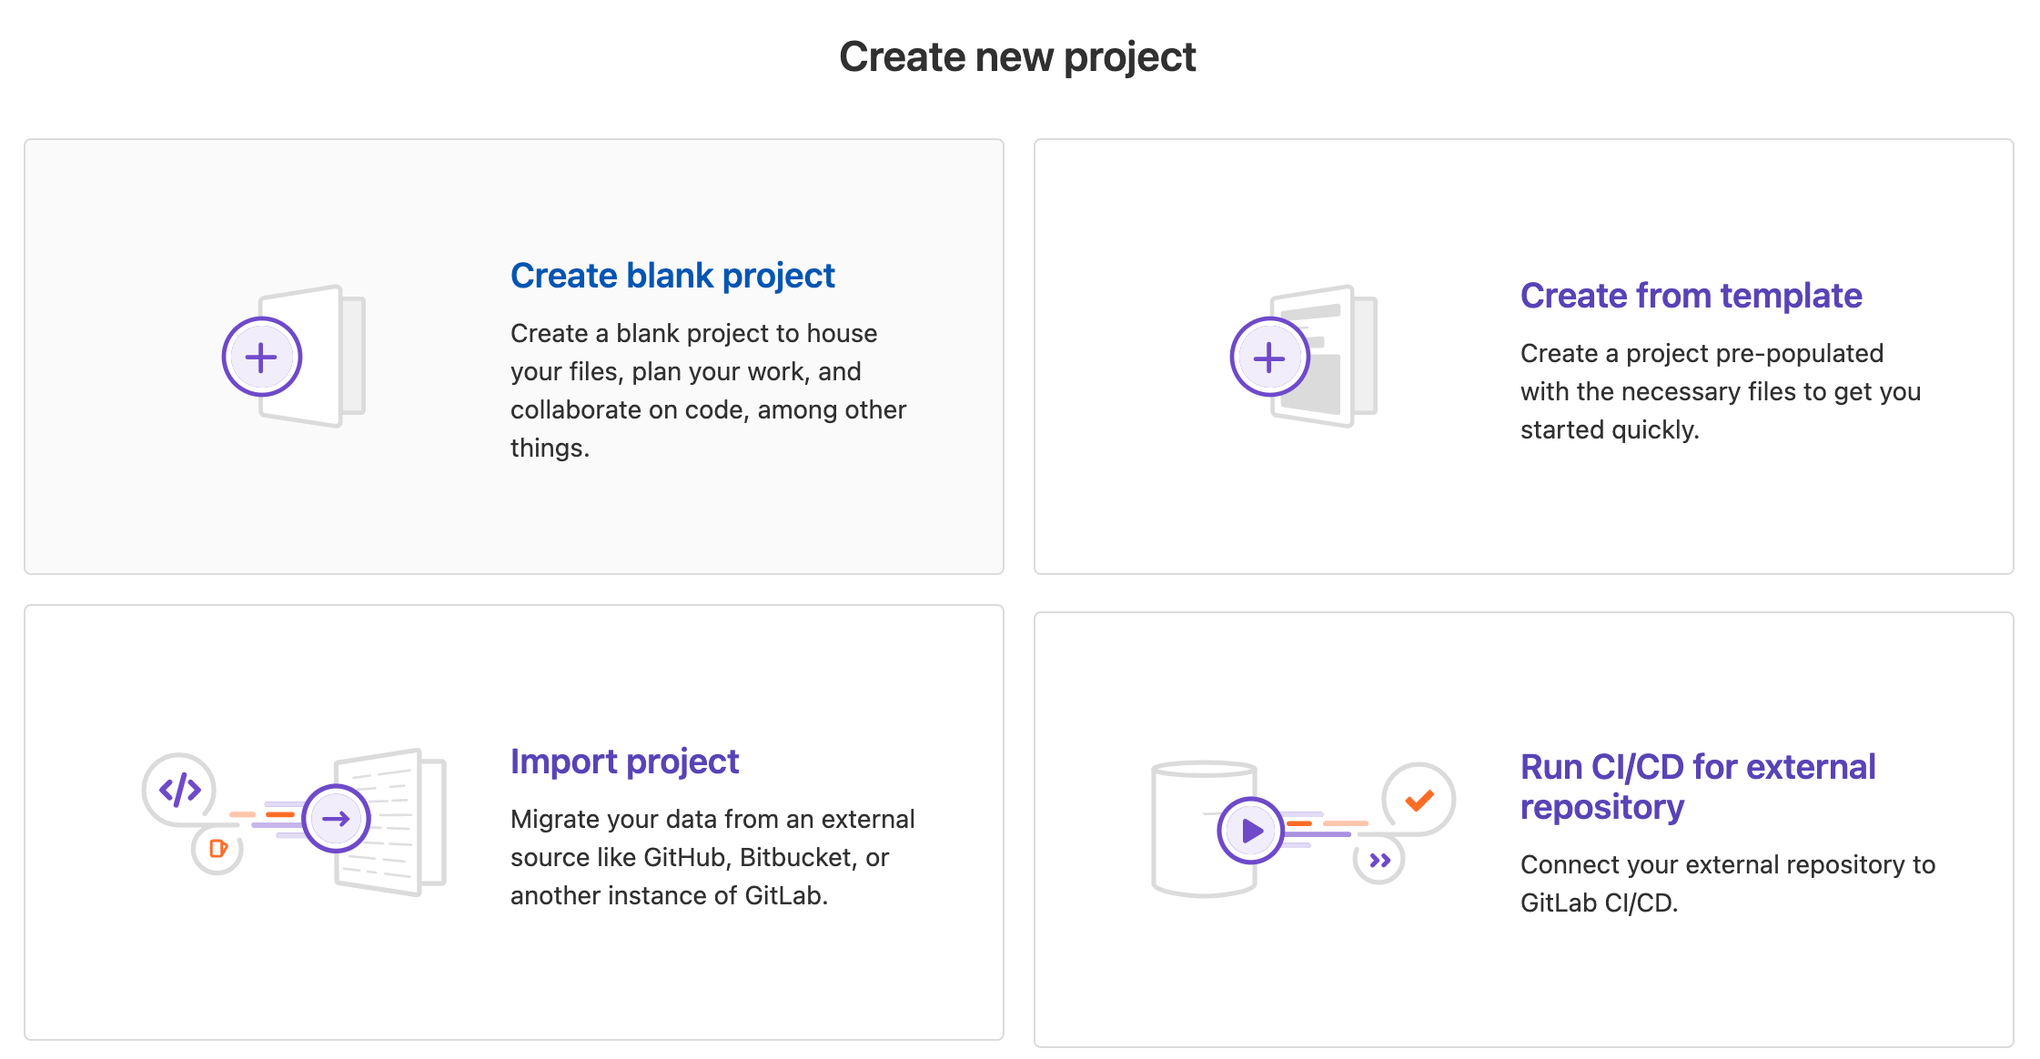 Creating a new project in GitLab